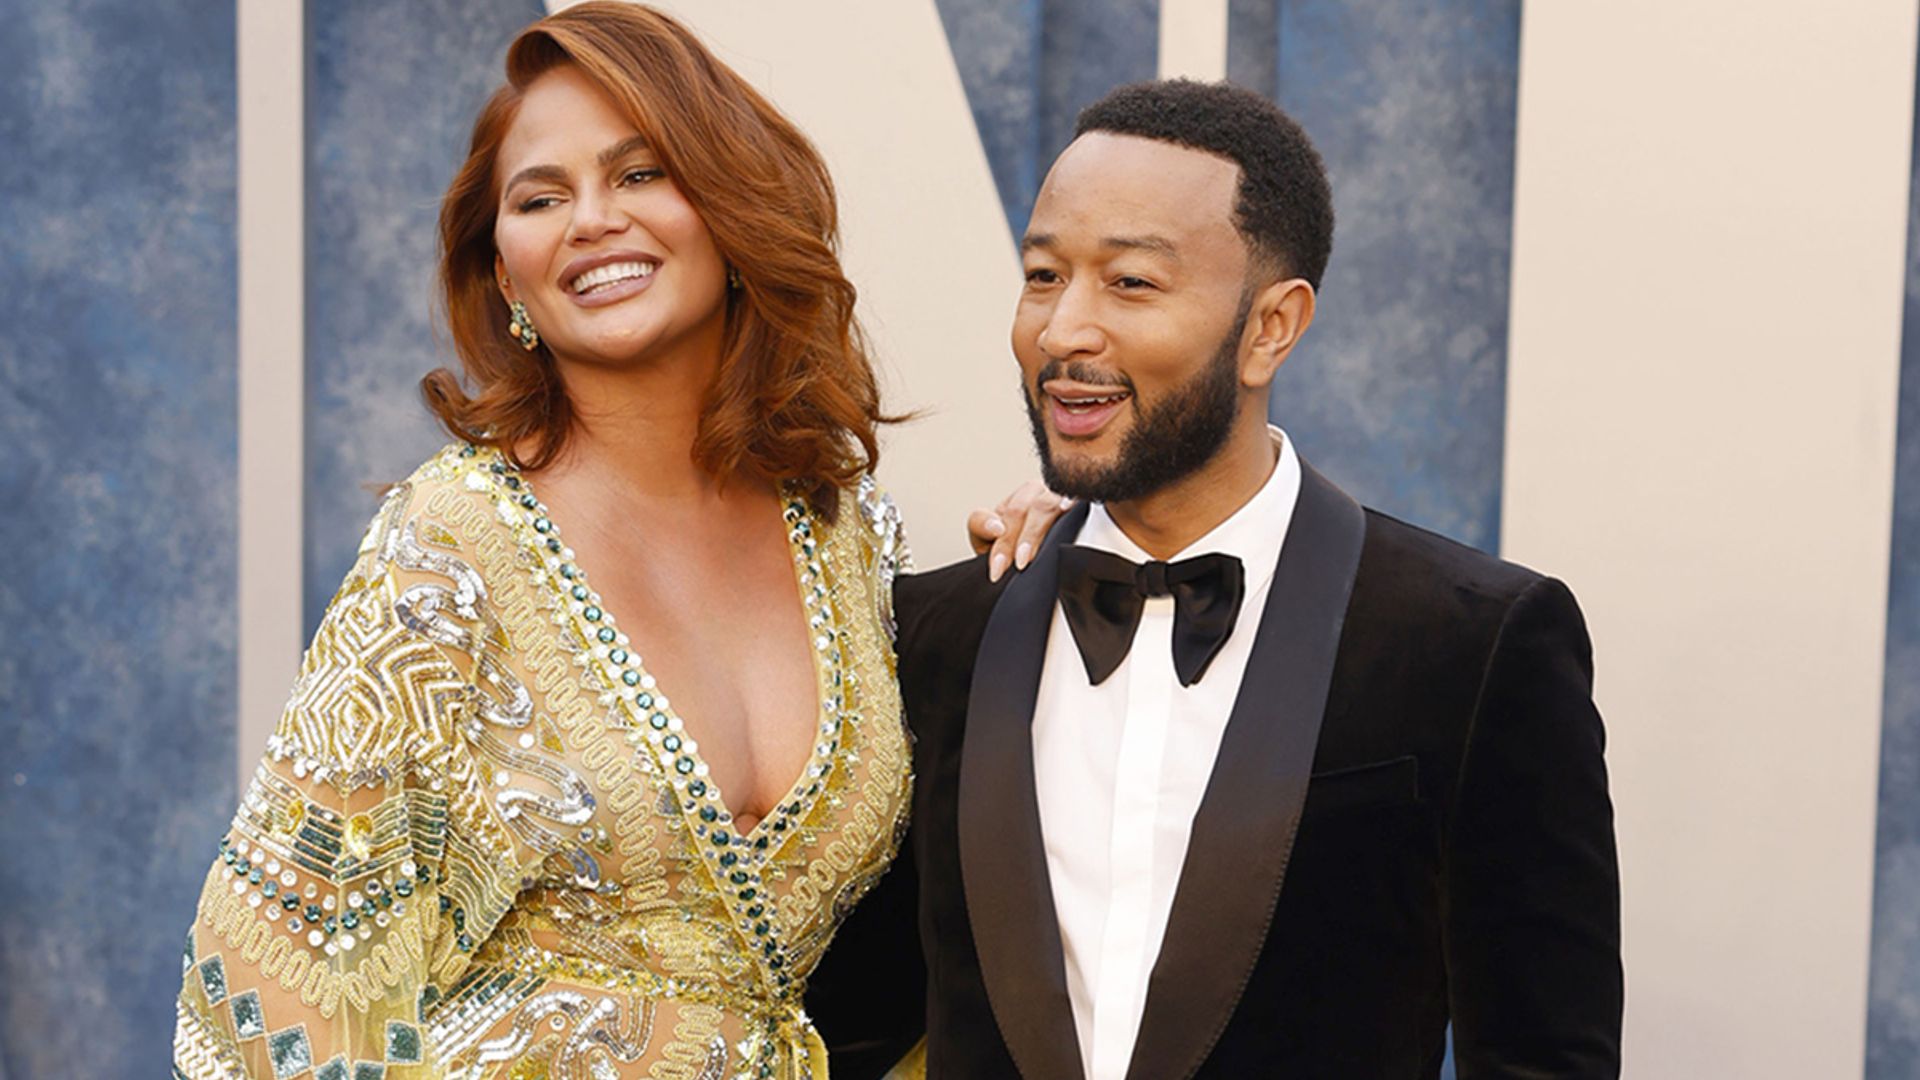 Chrissy Teigen and John Legend: how the couple have weathered rocky patches in their marriage